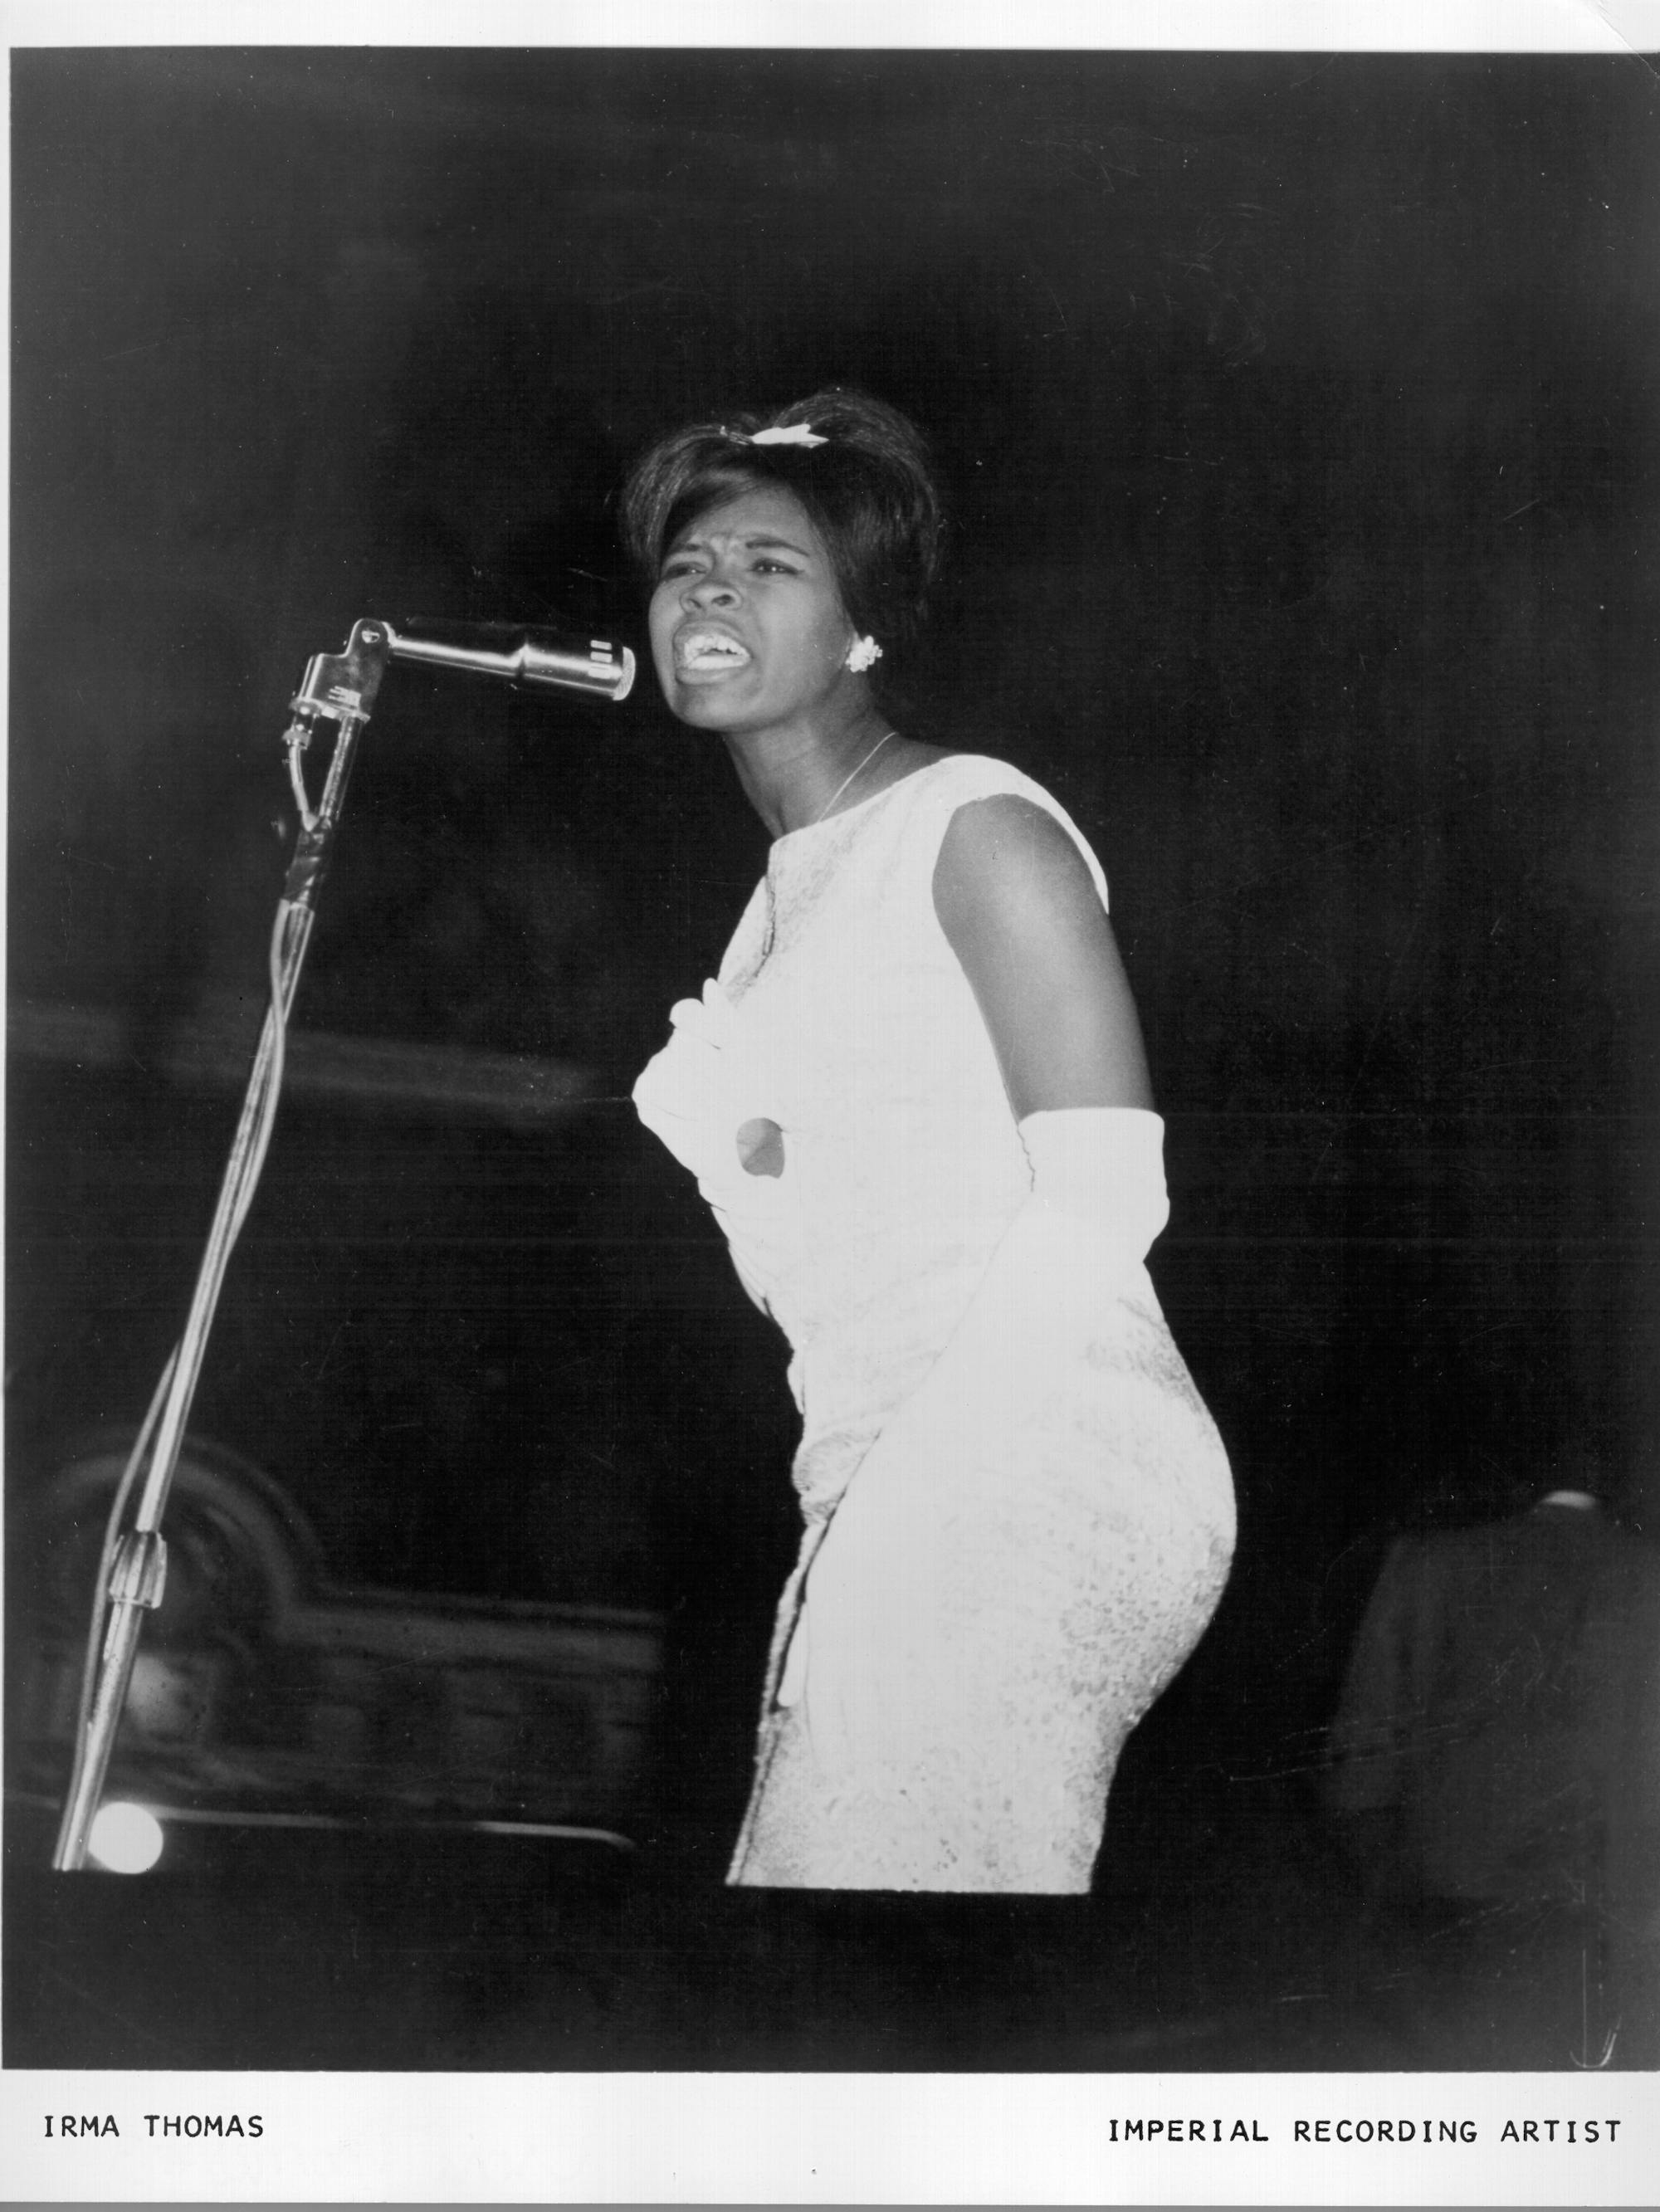 Irma Thomas wears a fabulous white dress and gloves and sings into a mic.